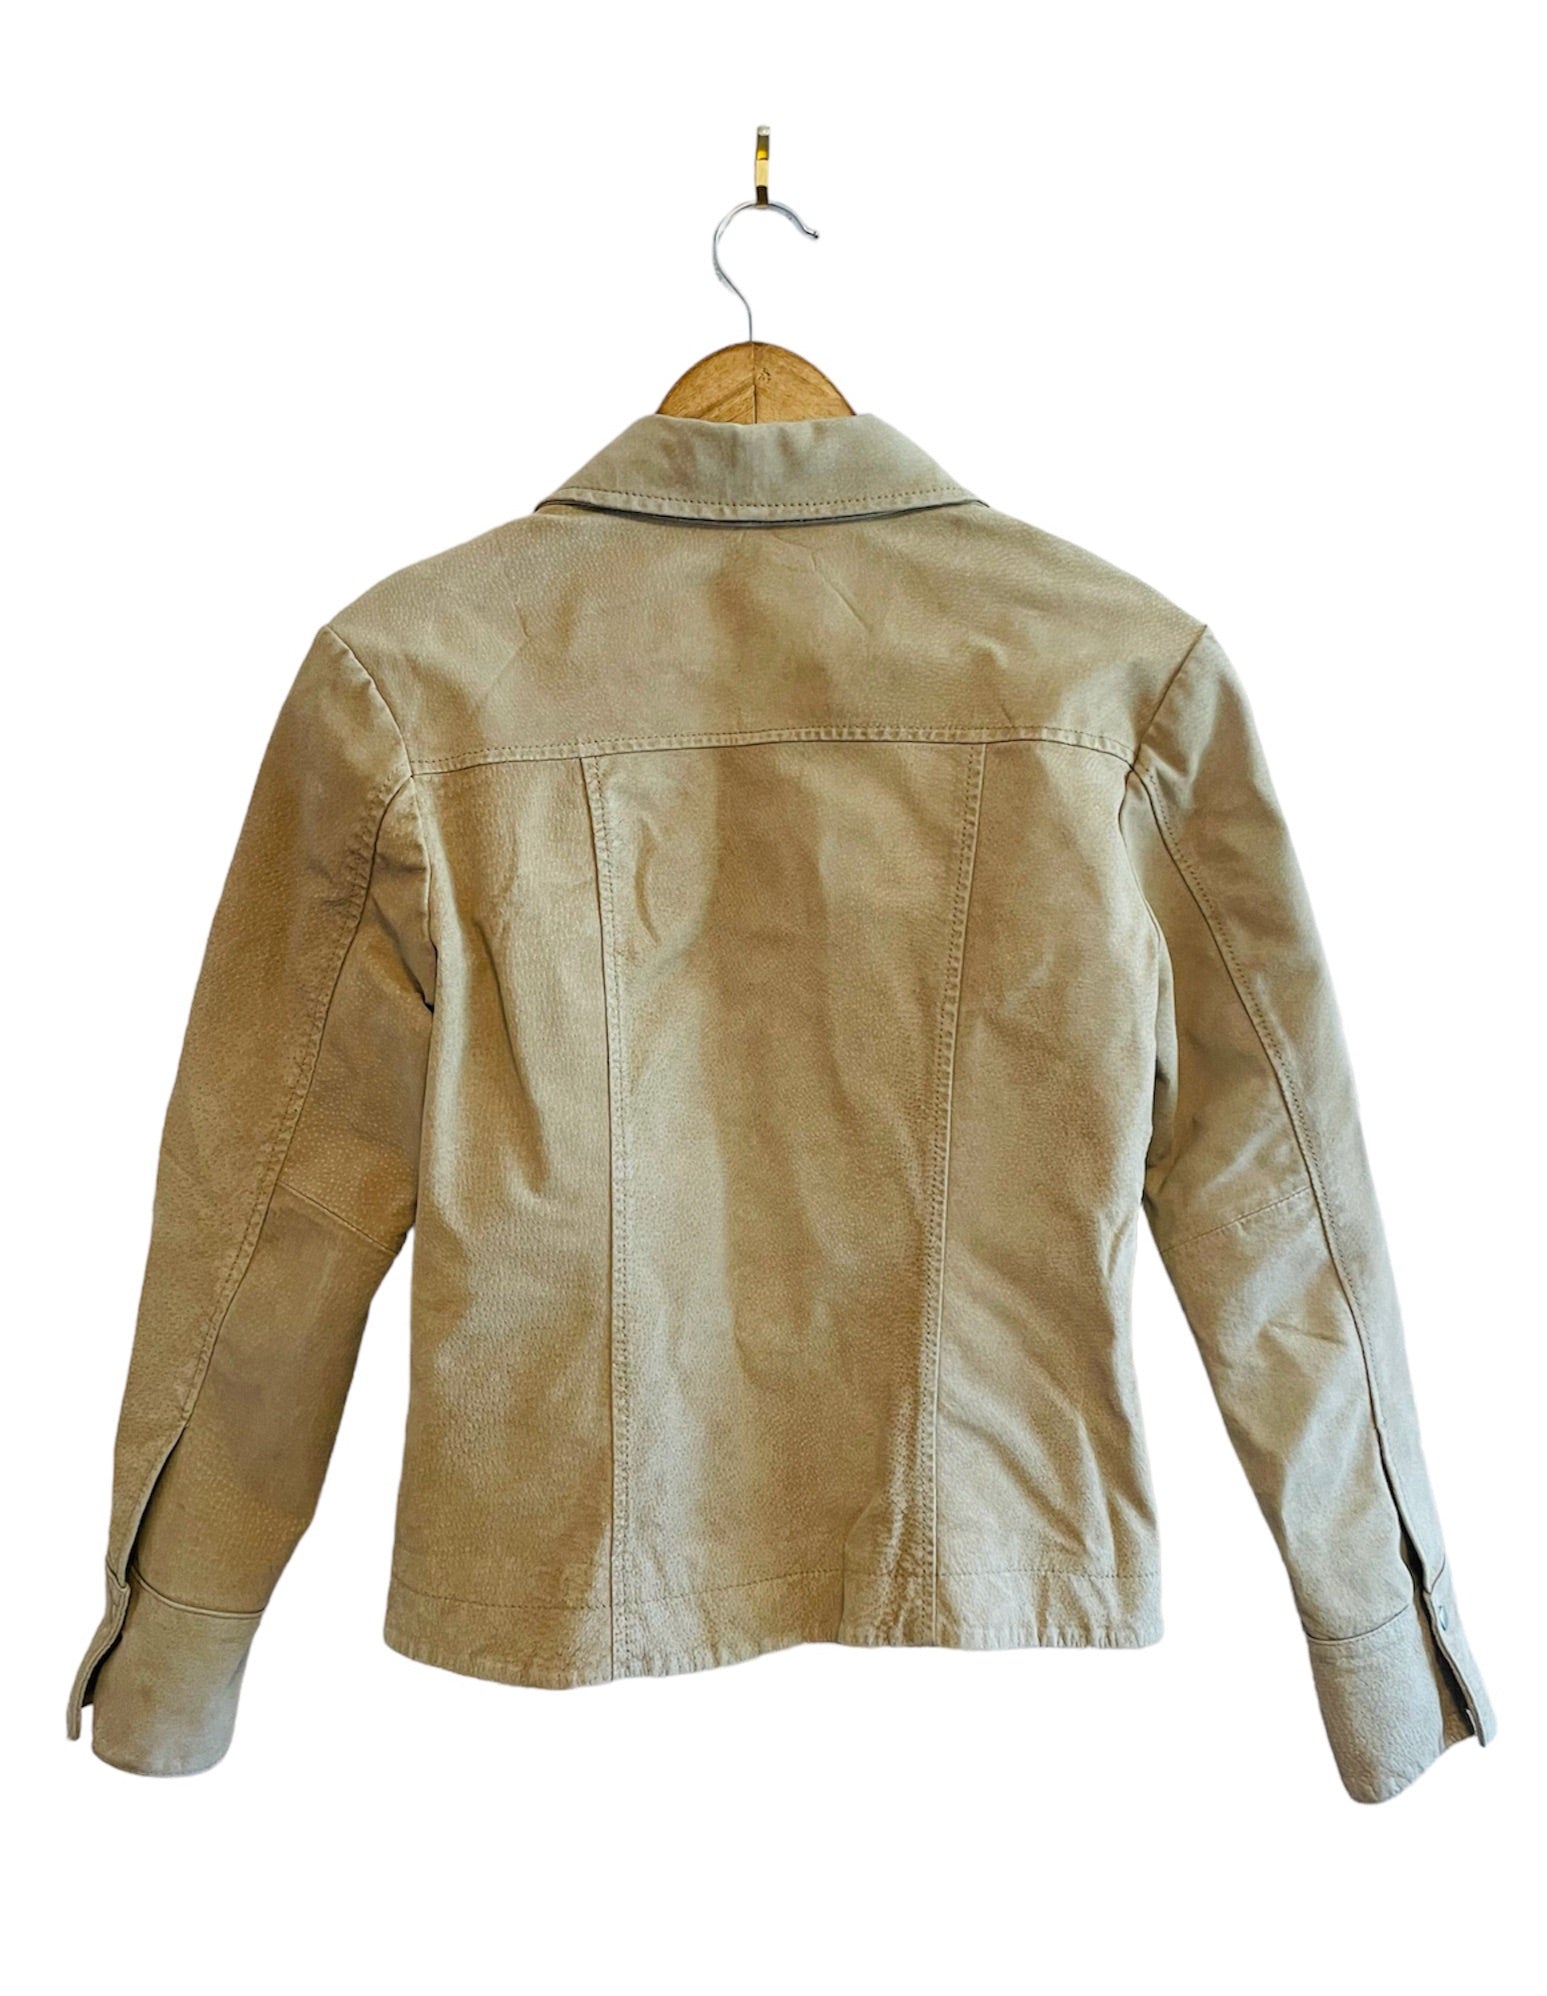 Tan Leather Button up Jacket Size: Small